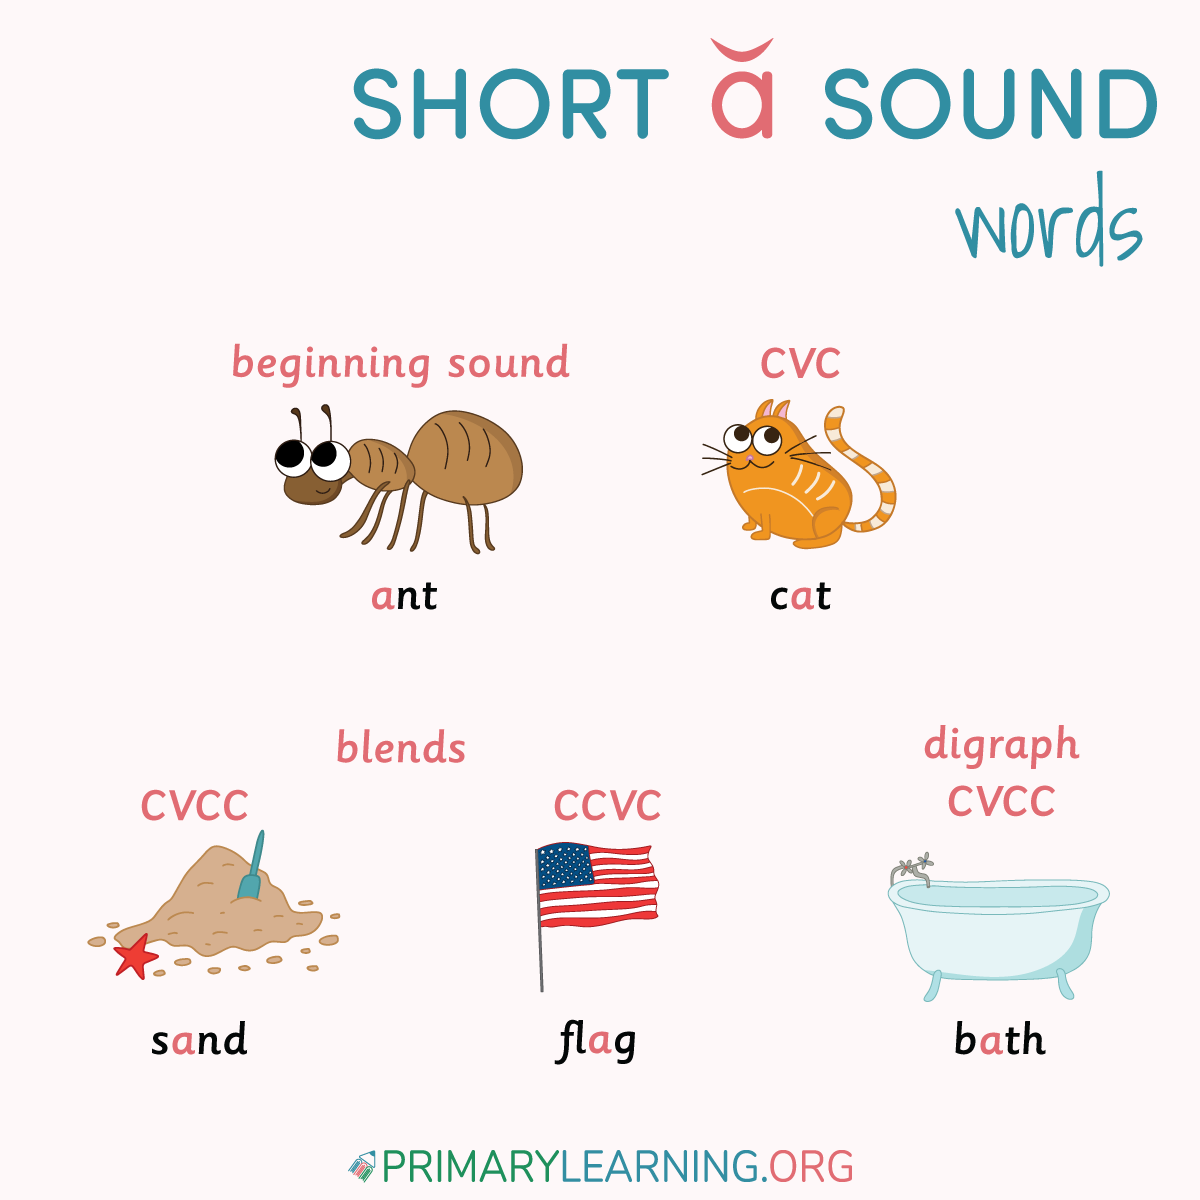 Sounding it Out: A Comprehensive Guide to the Short A Sound Words